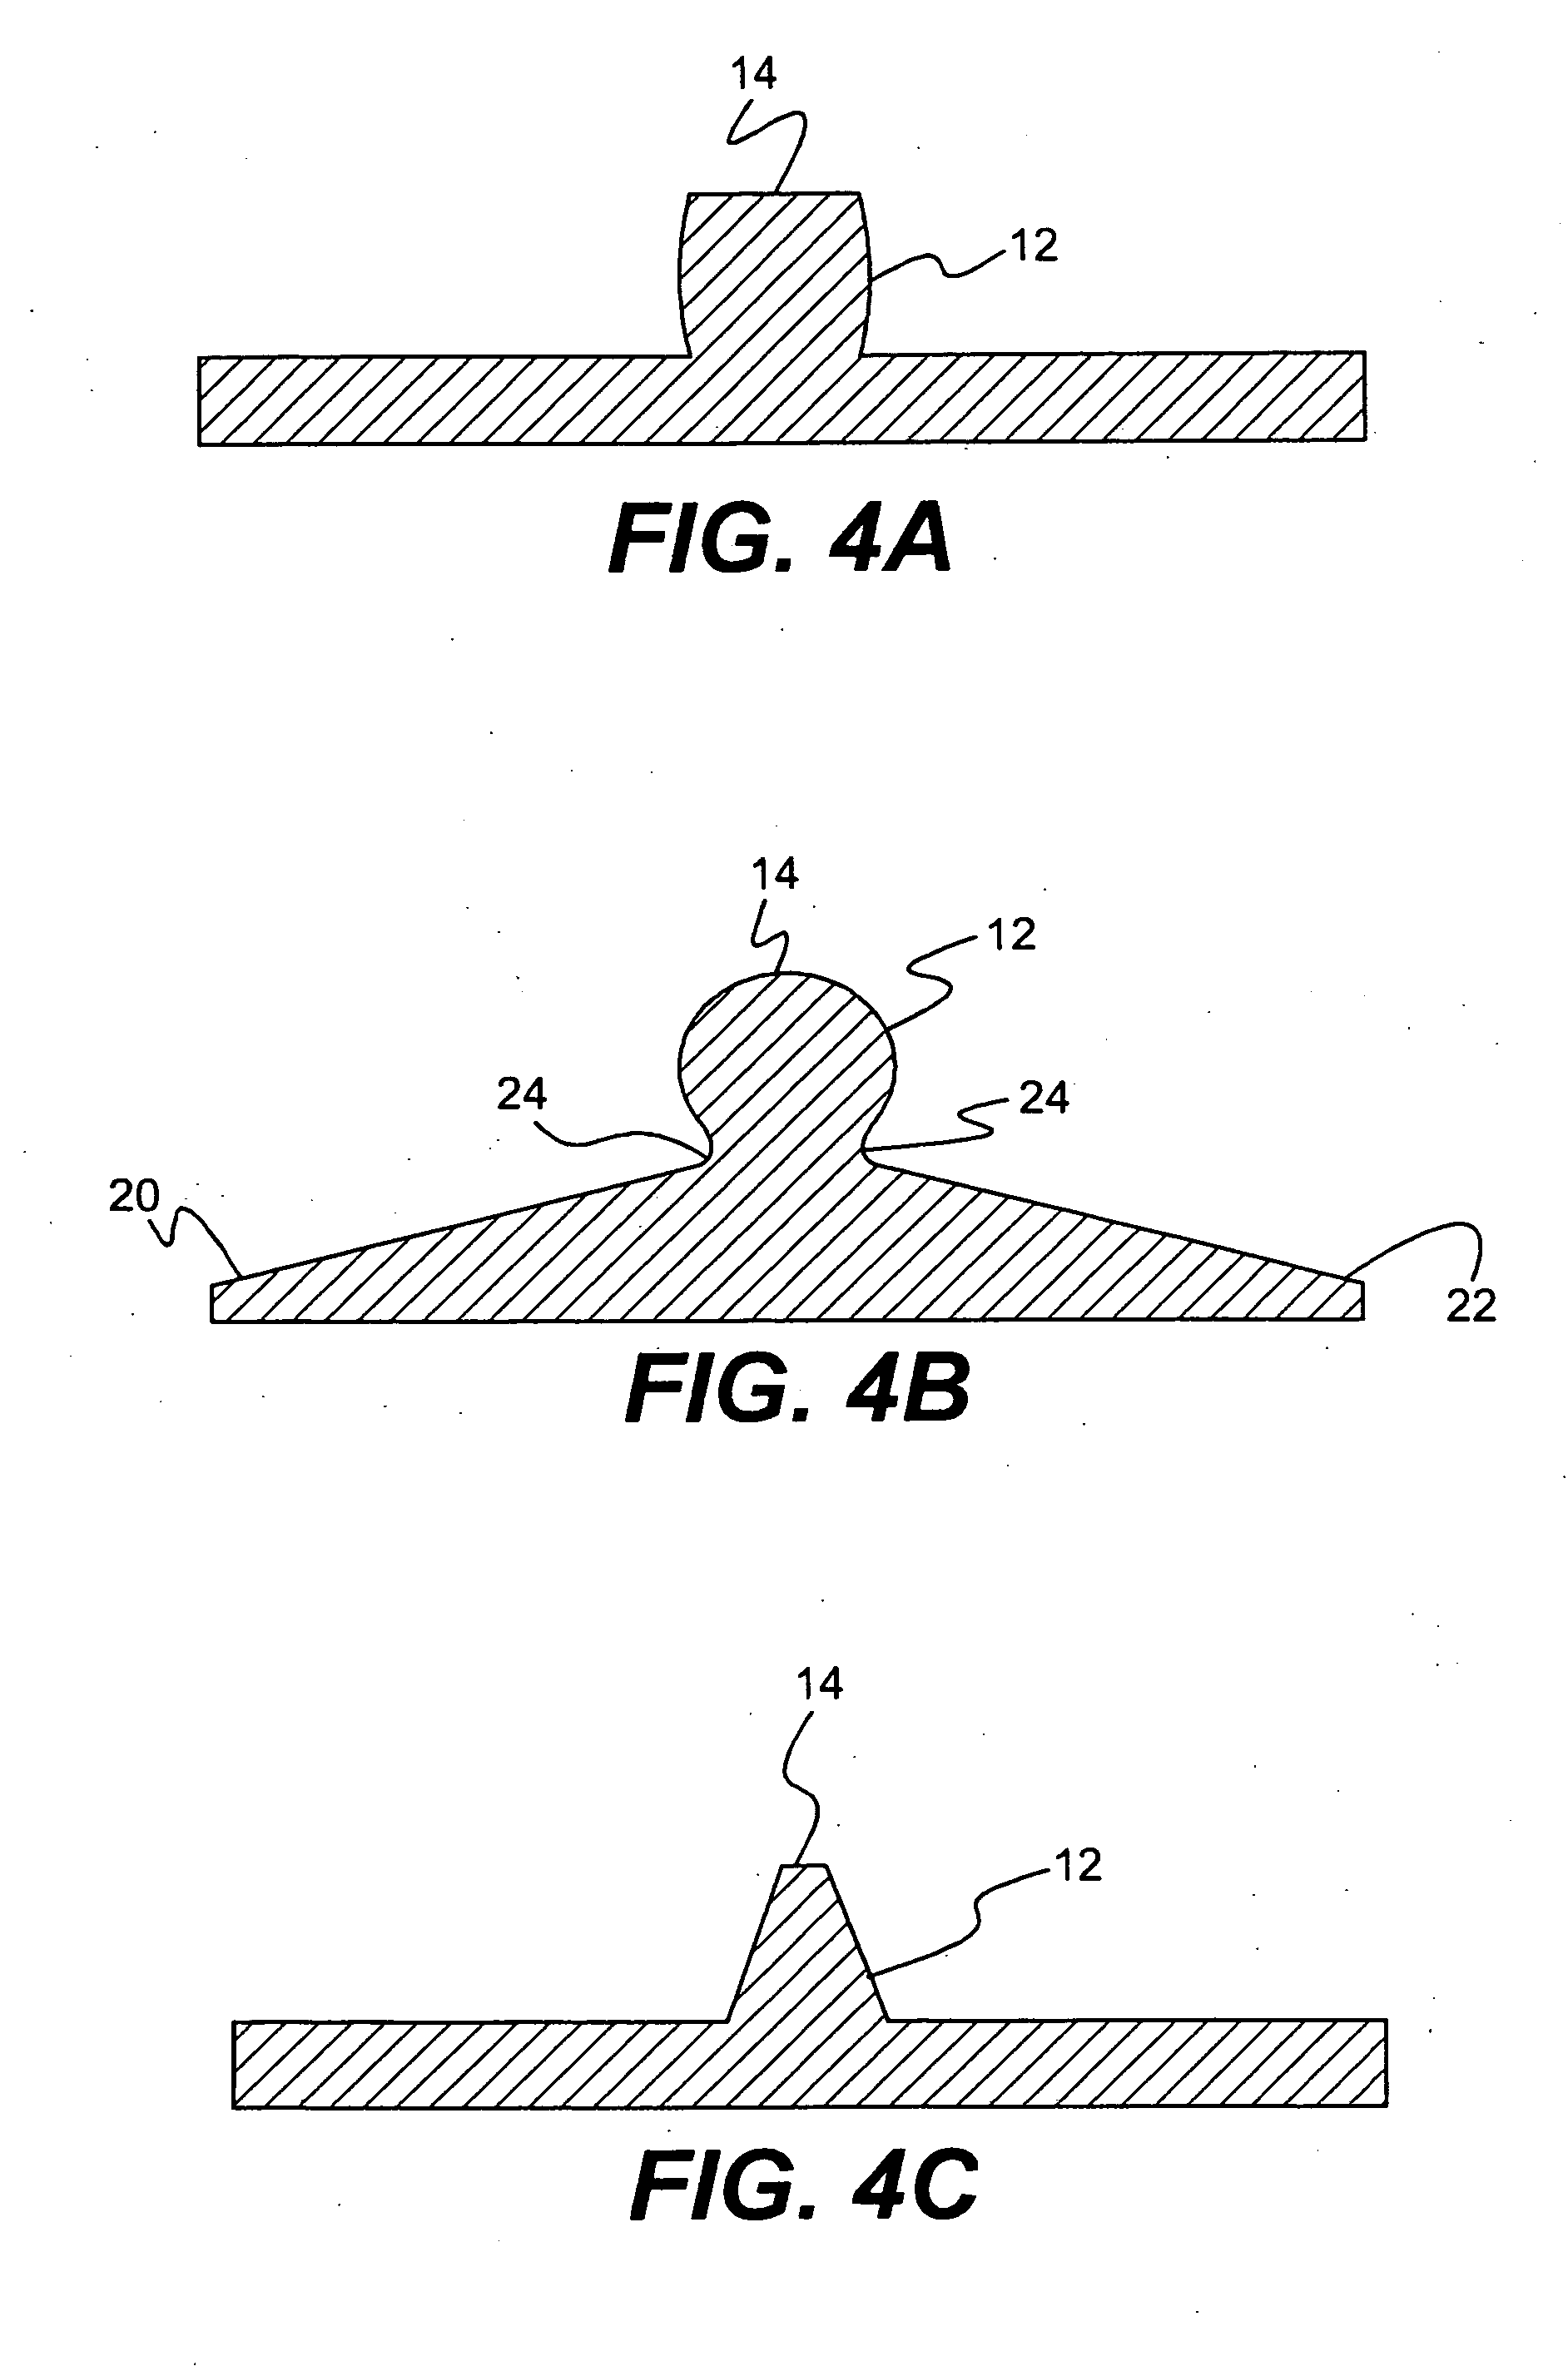 Spinal disc annulus repair device